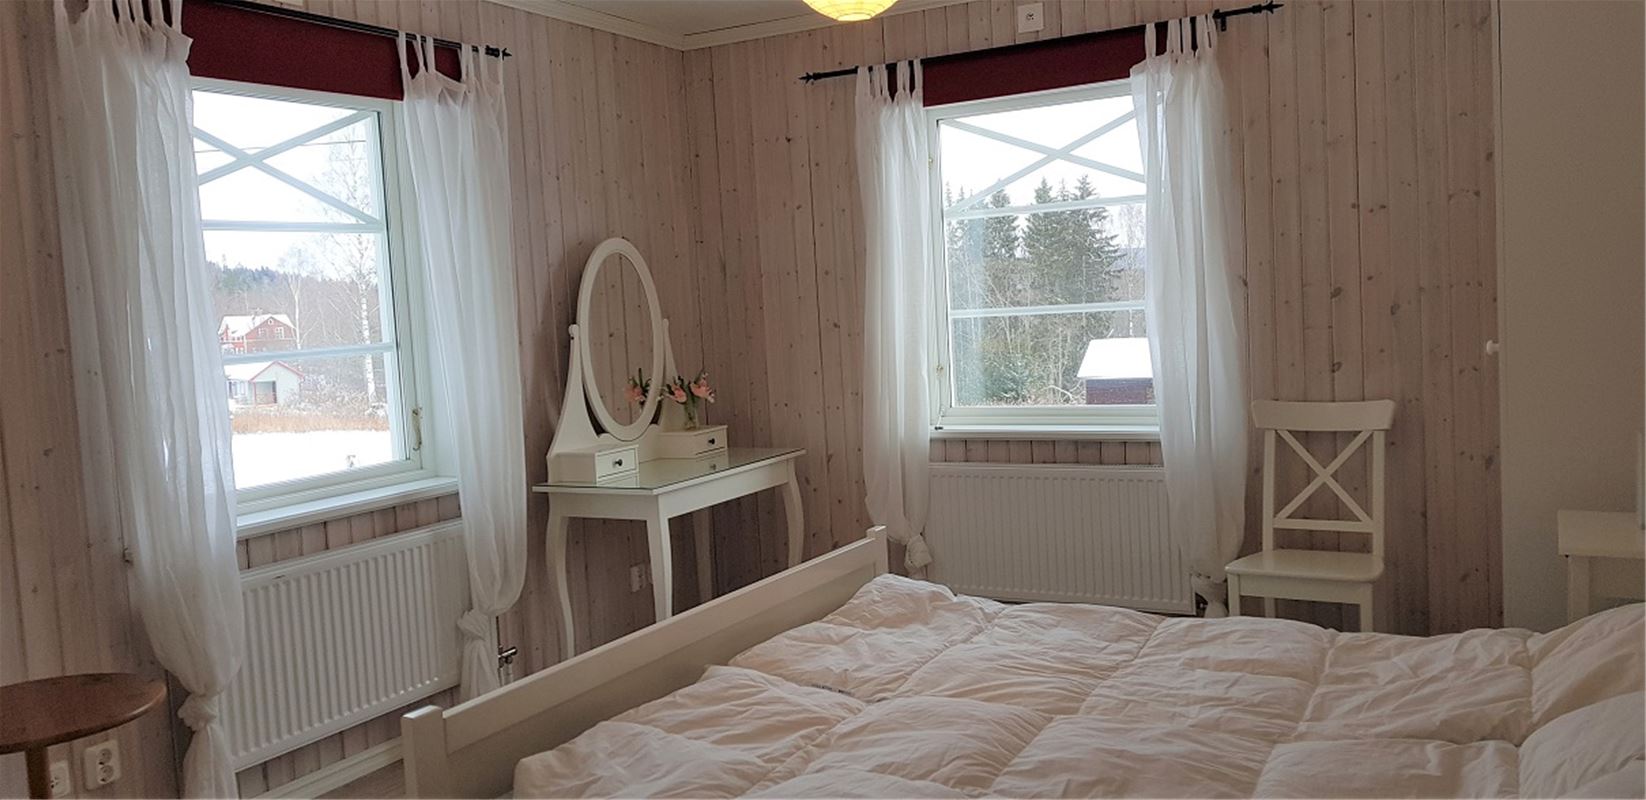 Bedroom with two windows and a dressing table in the corner.